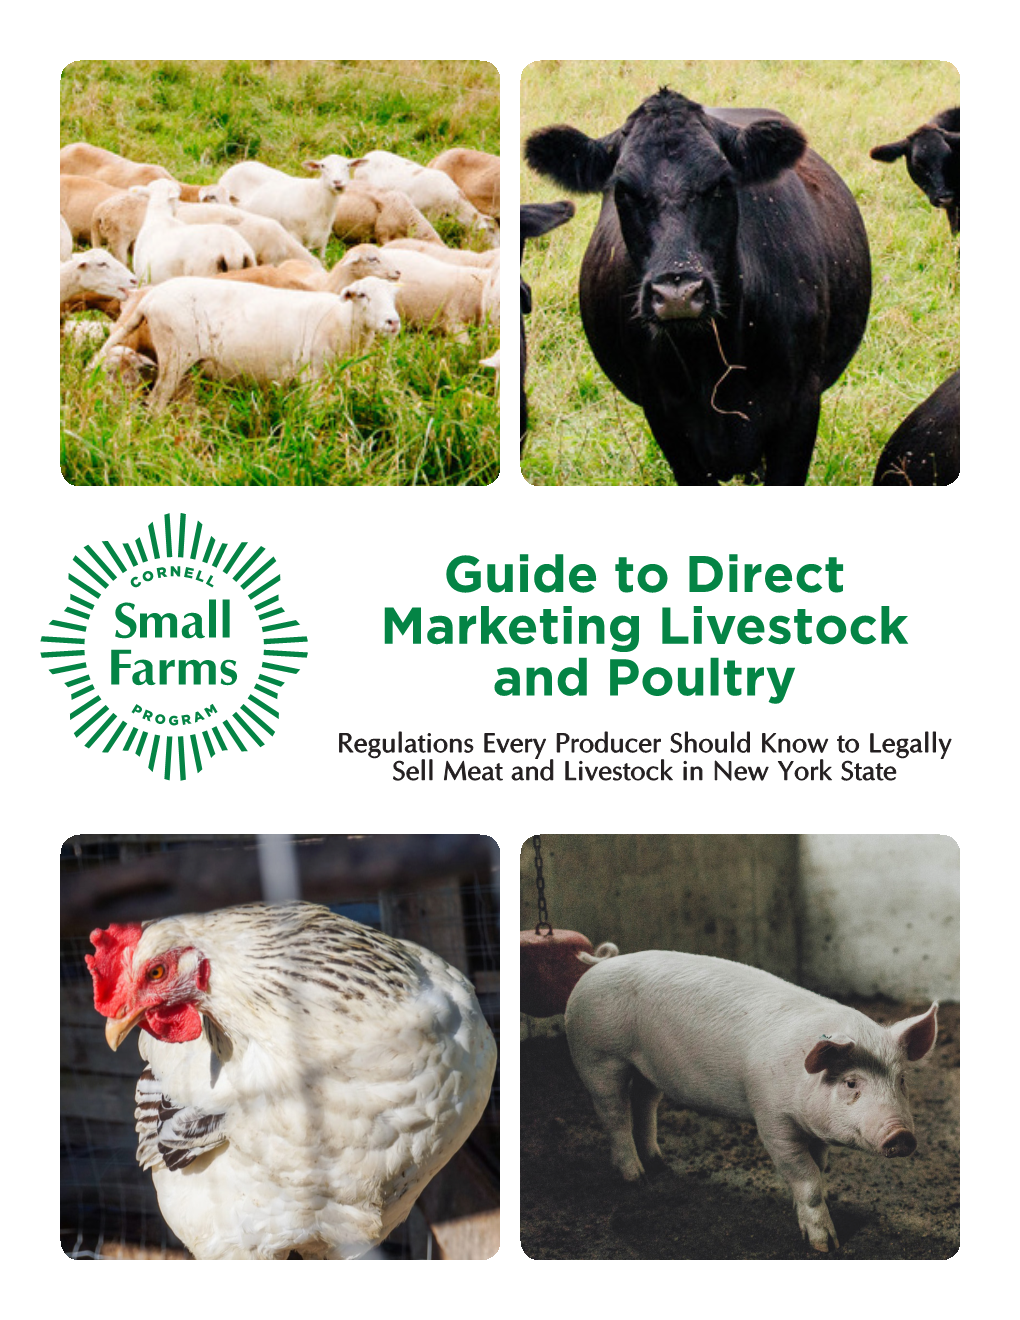 Guide to Direct Marketing Livestock and Poultry Regulations Every Producer Should Know to Legally Sell Meat and Livestock in New York State